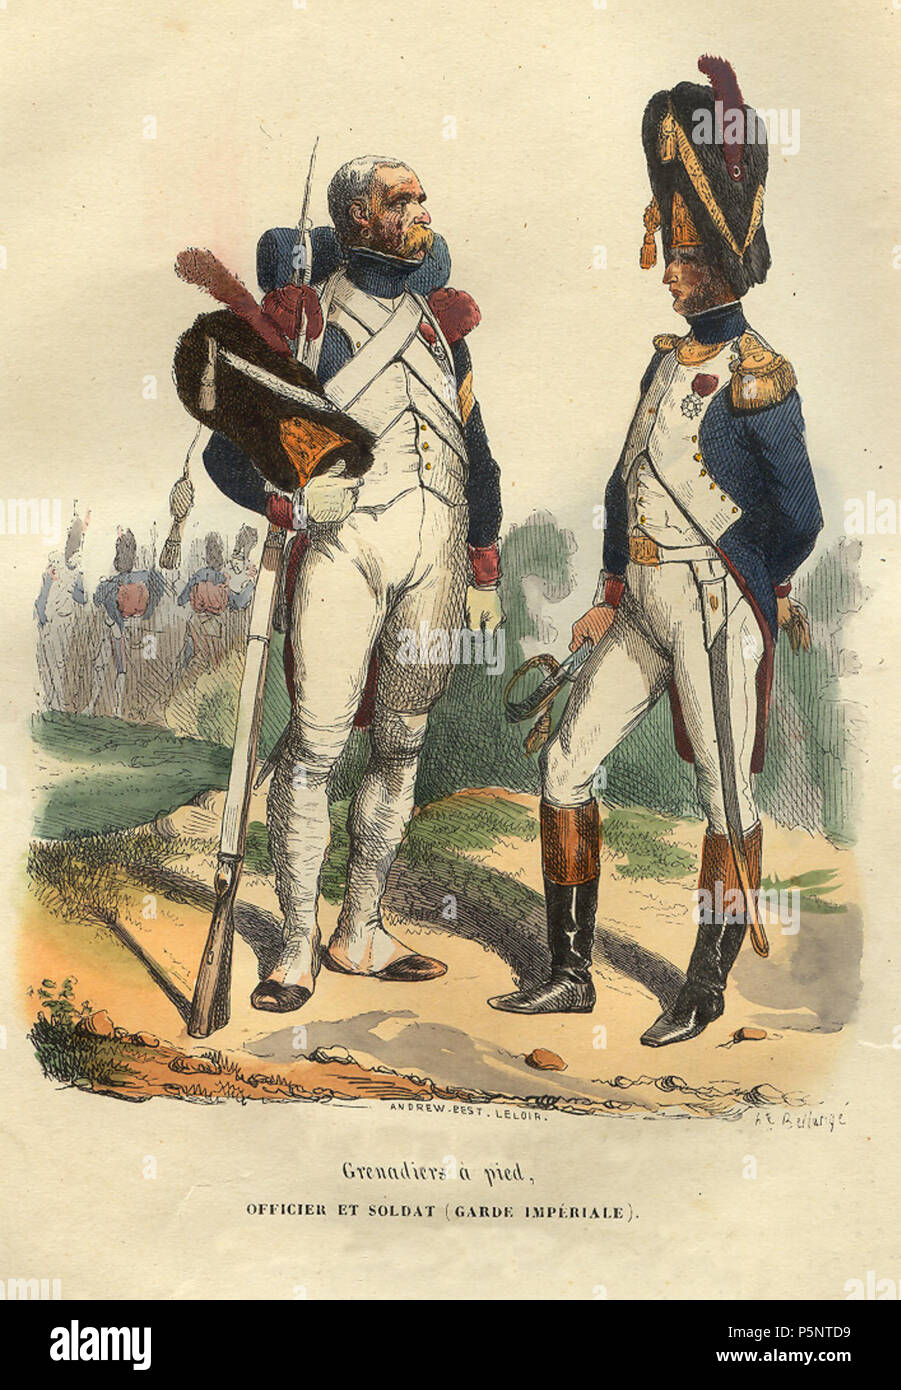 N/A. English: Soldier (left) and Officer (right) of the 1st Guard Grenadier Regiment. .   Hippolyte Bellangé  (1800–1866)     Alternative names Joseph-Louis-Hippolyte Bellangé  Description French painter and lithographer  Date of birth/death 17 January 1800 10 April 1866  Location of birth/death Paris Paris  Work location Paris (1818–1866); Rouen (1837–1854)  Authority control  : Q3136027 VIAF:22241299 ISNI:0000 0001 0837 3002 ULAN:500015839 LCCN:no96041887 Open Library:OL5571730A WorldCat 184 Bellange-Grenadiers-Garde Stock Photo